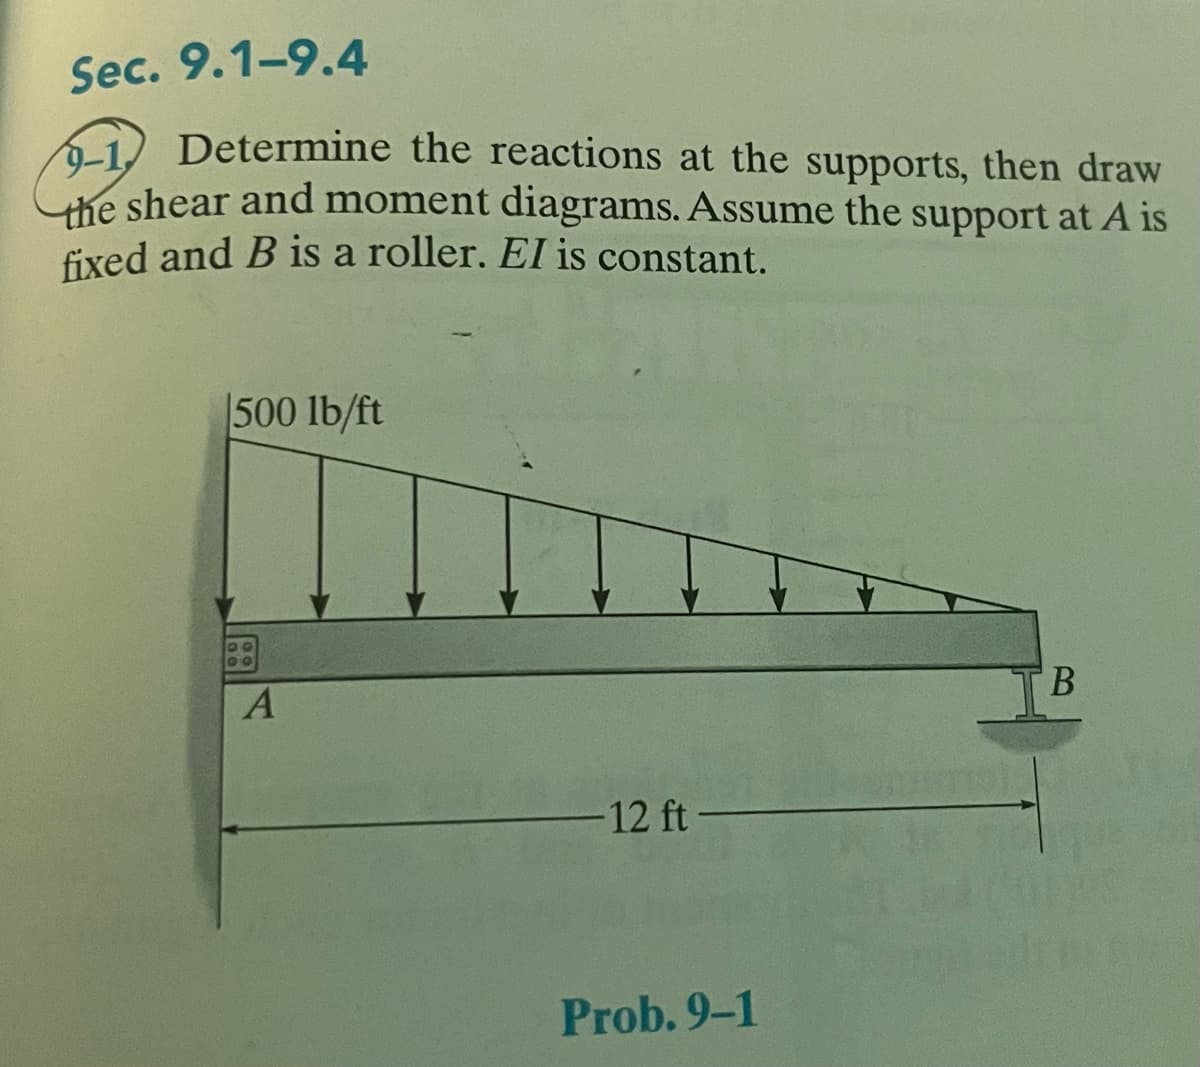 Sec. 9.1-9.4
9-1,
Determine the reactions at the supports, then draw
the shear and moment diagrams. Assume the support at A is
fixed and B is a roller. El is constant.
500 lb/ft
DO
A
-12 ft-
Prob. 9-1
B